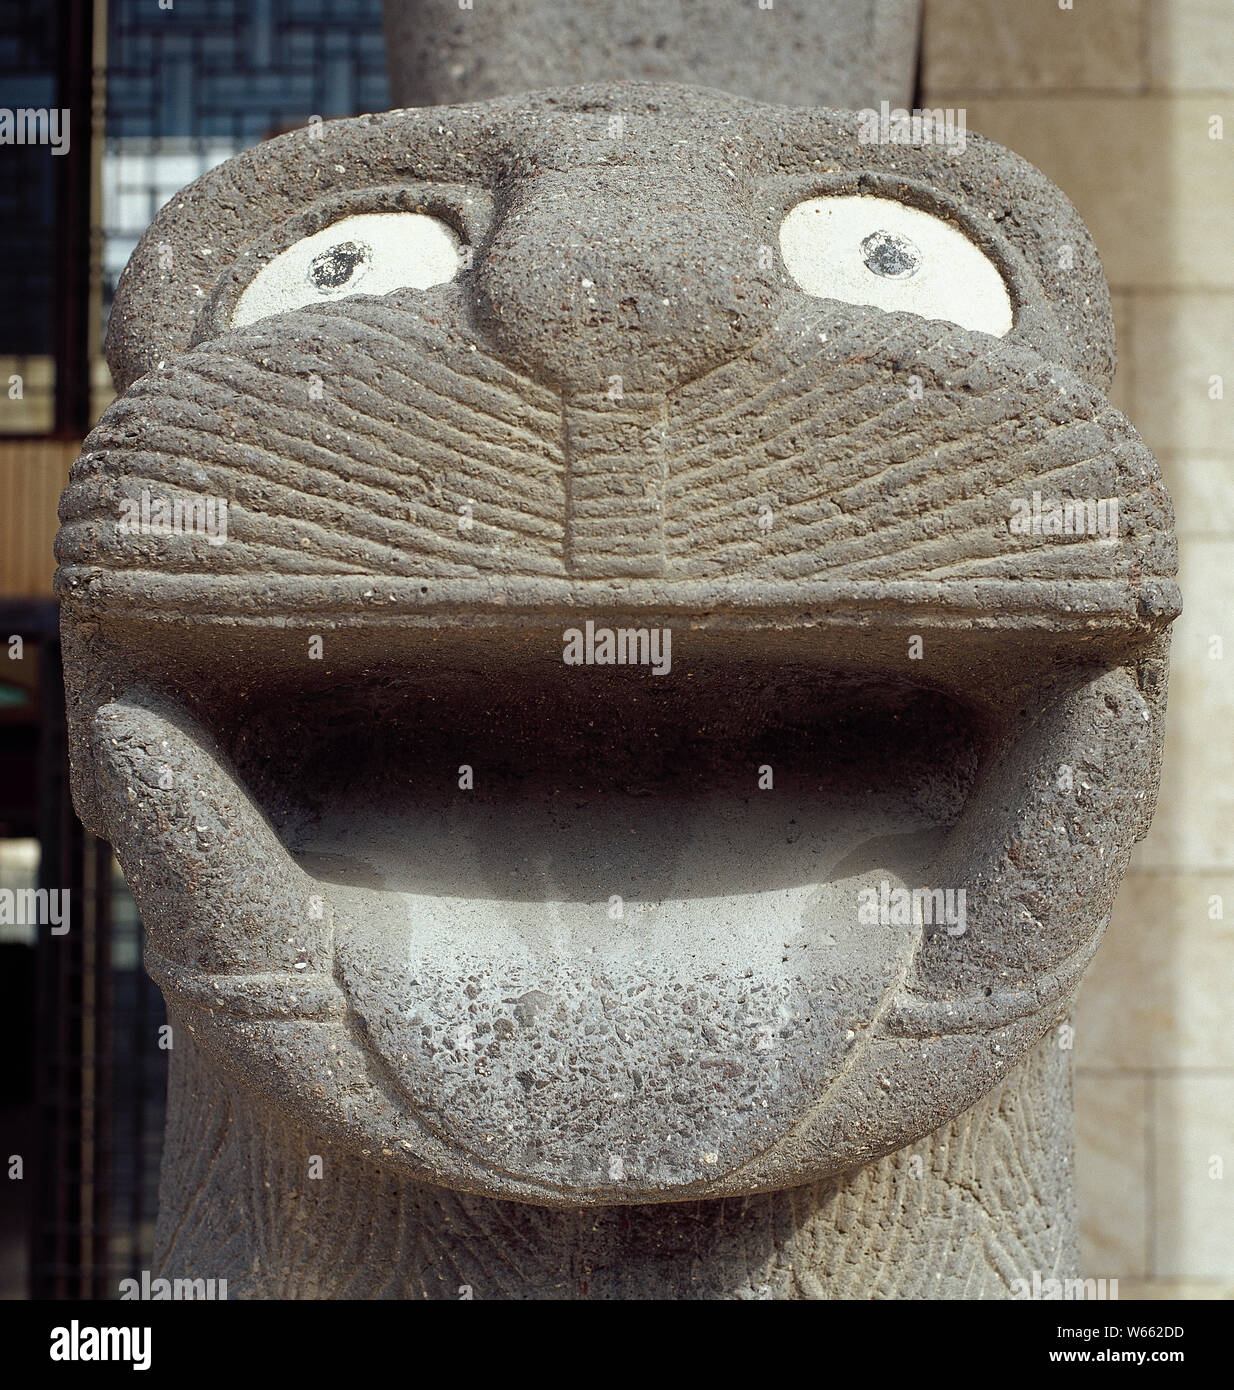 Eastern Mediterranean Civilization. Syria. Halaf Culture (6100-5100 BC). Iron Age Neo-Hittite Settlement of Tell Halaf. Scultpure depicting a head of a lion which guarded the Tell Halaf Temple, placed at the entrance of the National Museum of Aleppo. (Picture taken before the civil war). Stock Photo